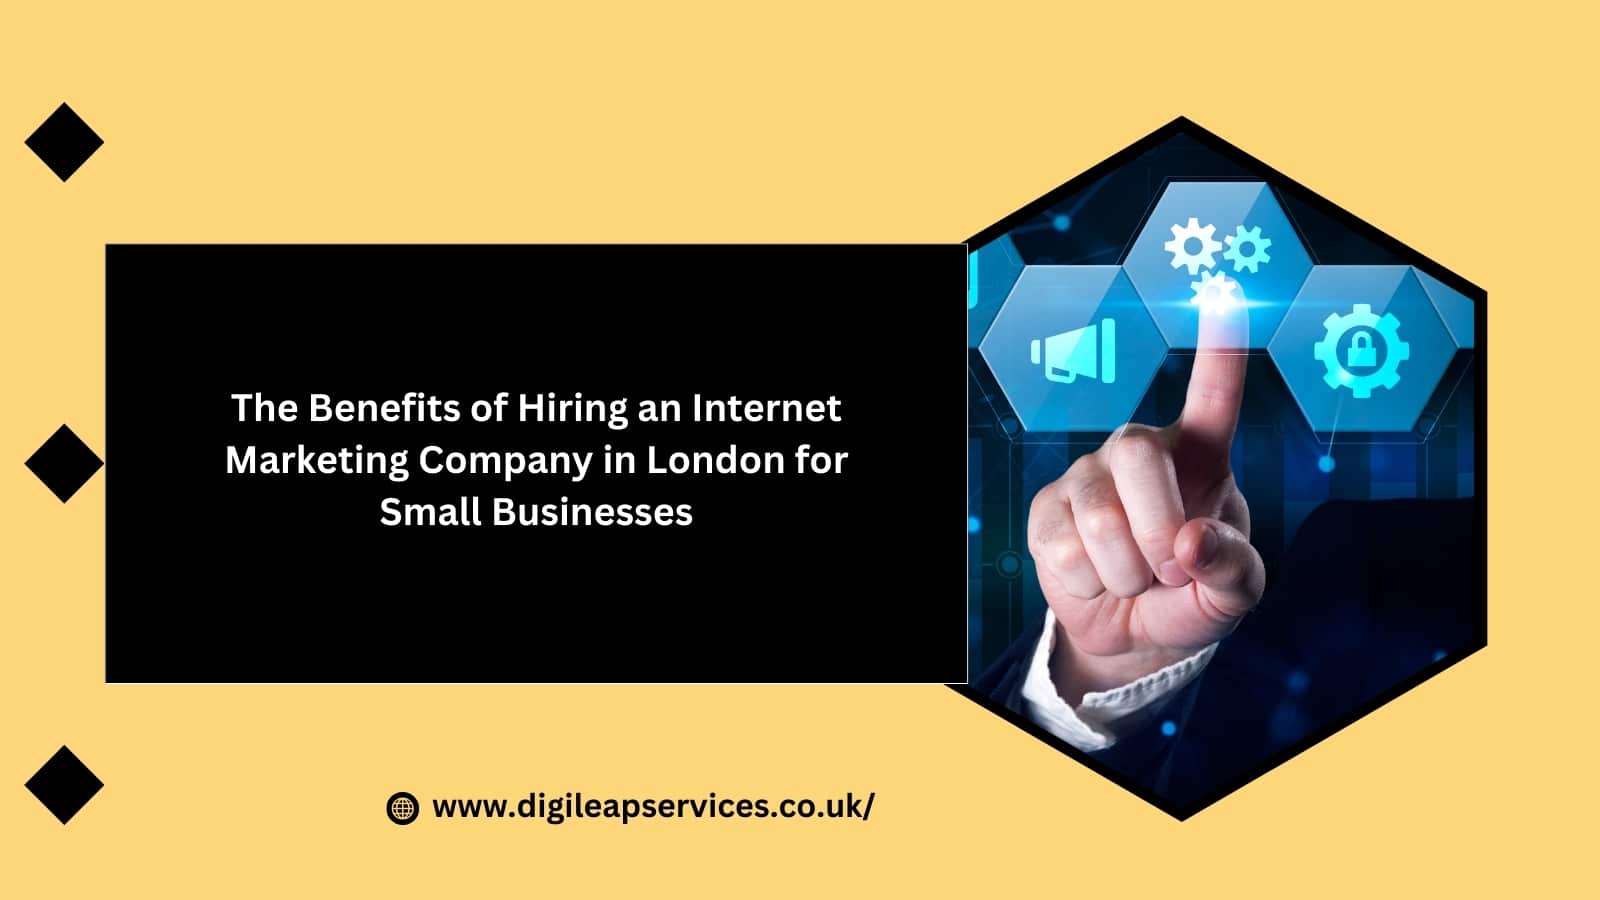 The Benefits of Hiring an Internet Marketing Company in London for Small Businesses